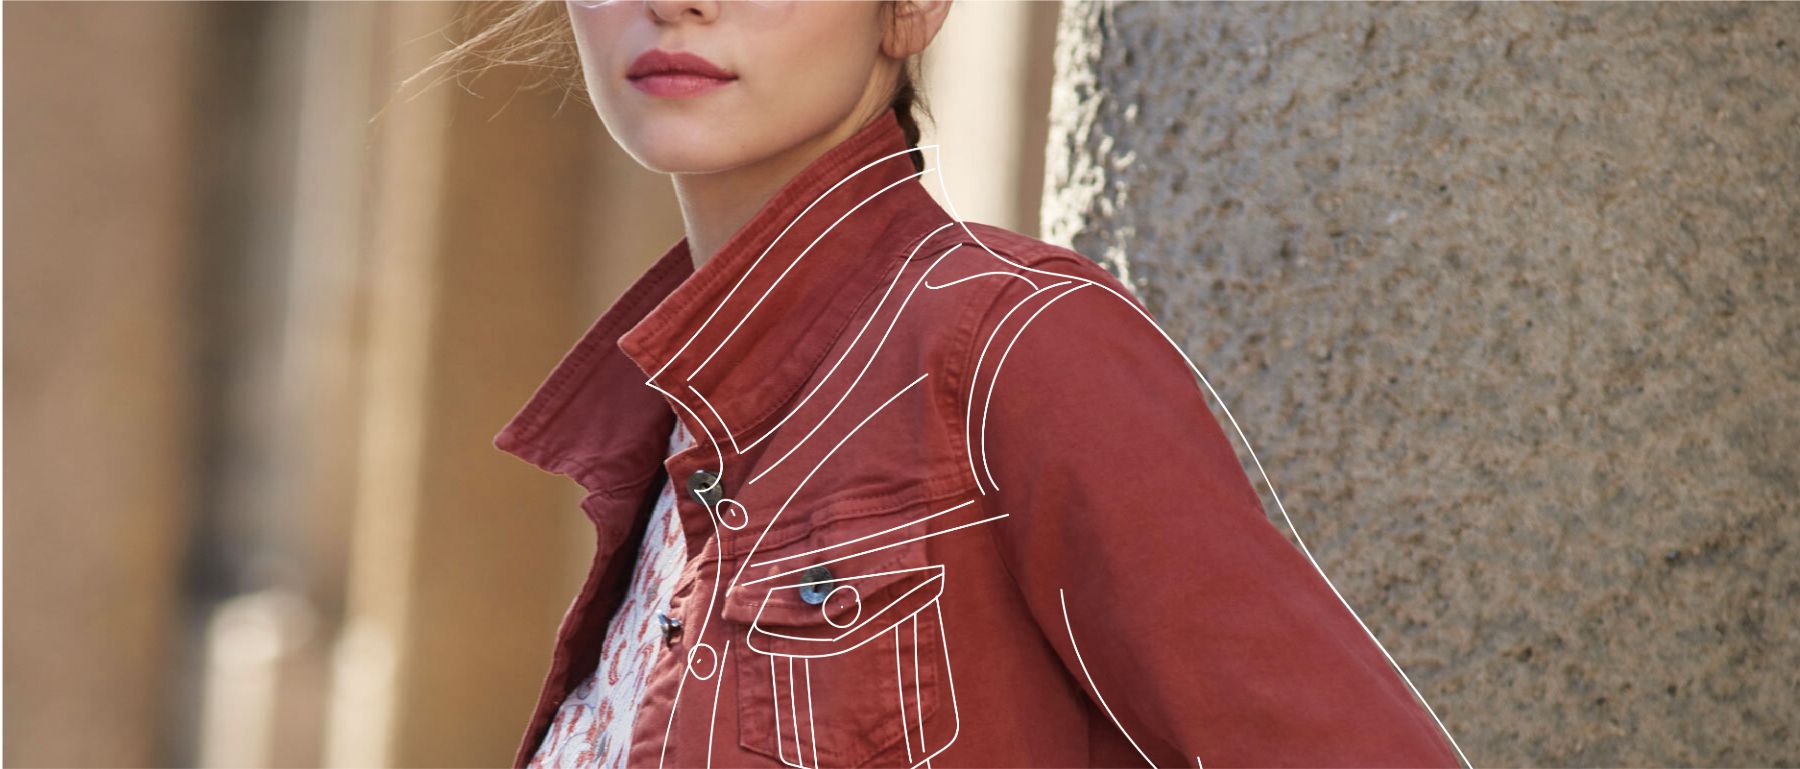 3 Jackets, 3 Looks: How to wear the Denim Jacket this Spring.